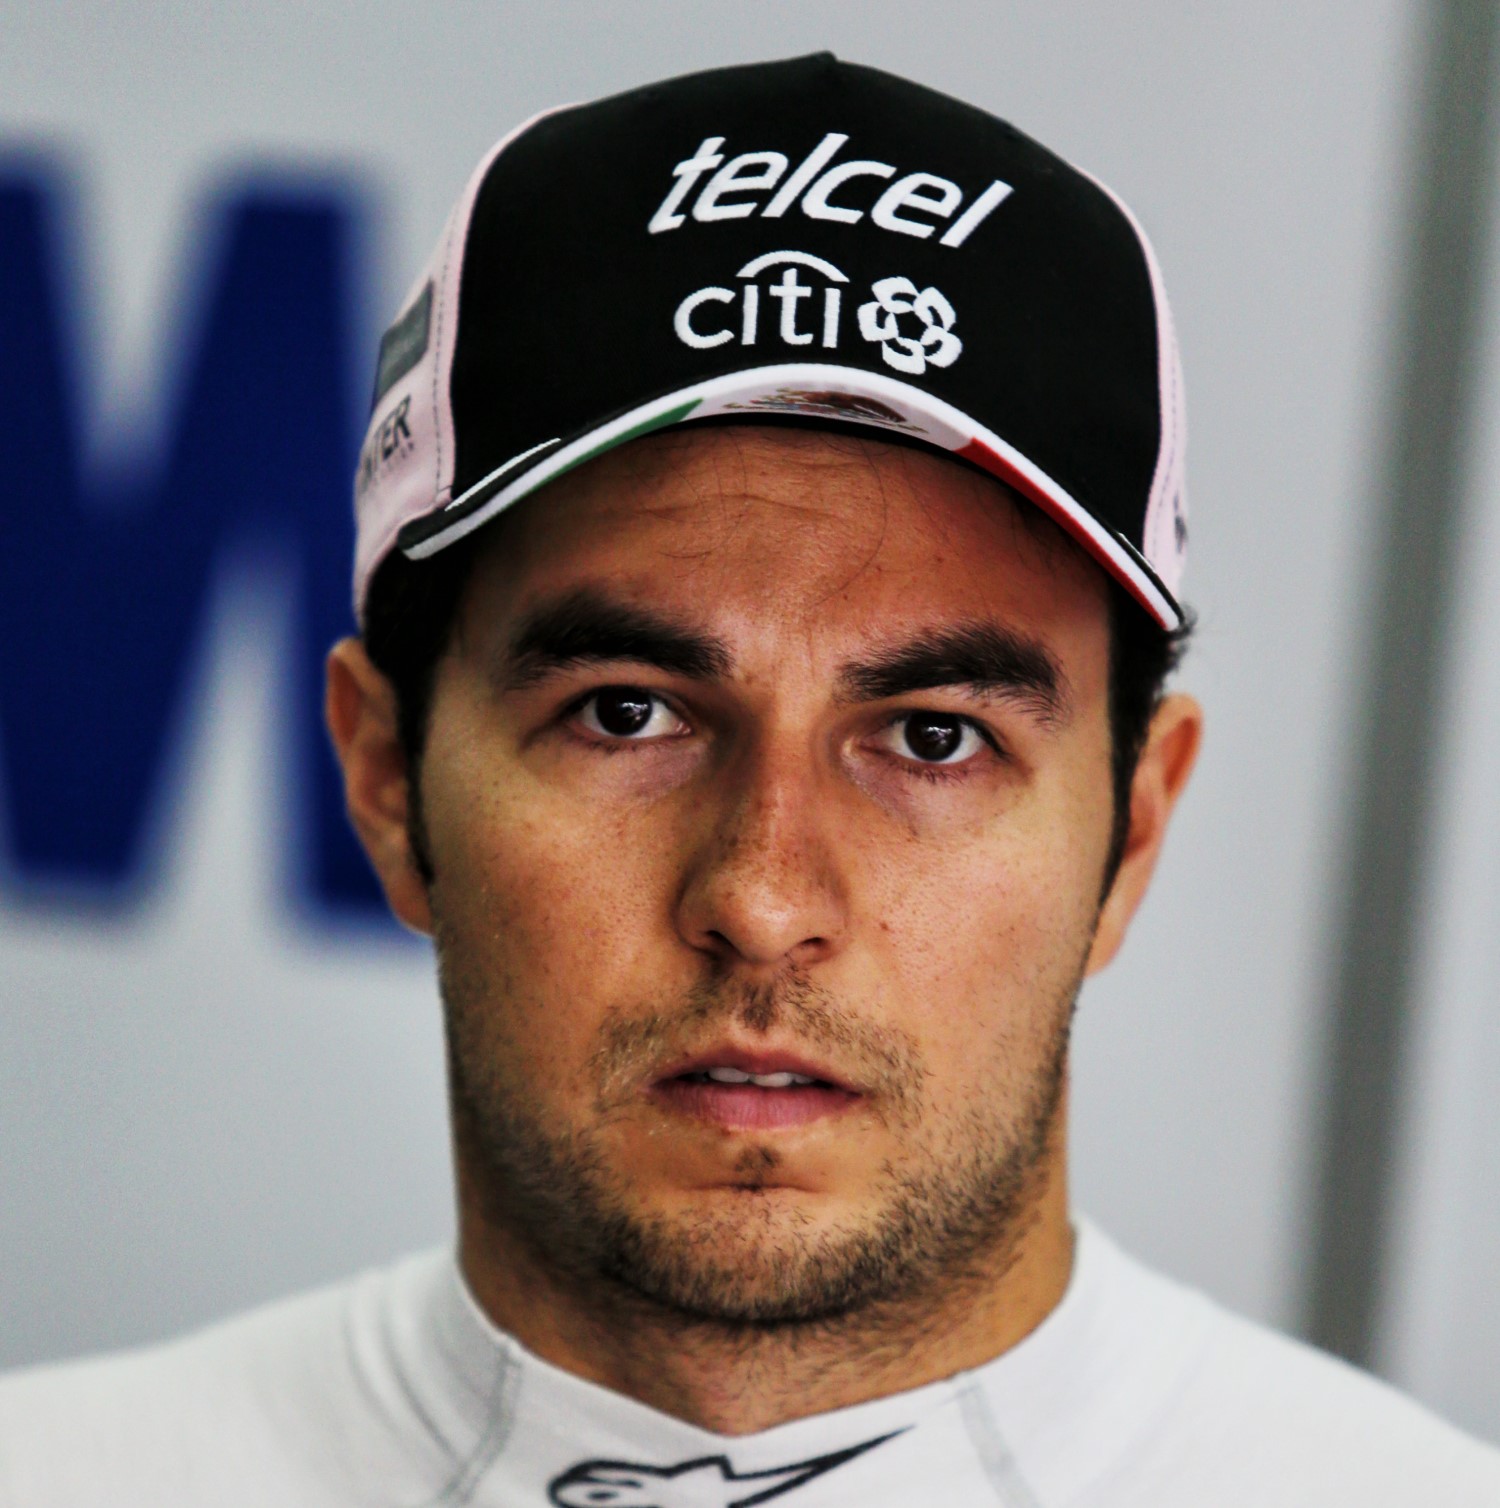 Sergio Perez to stay at Force India?